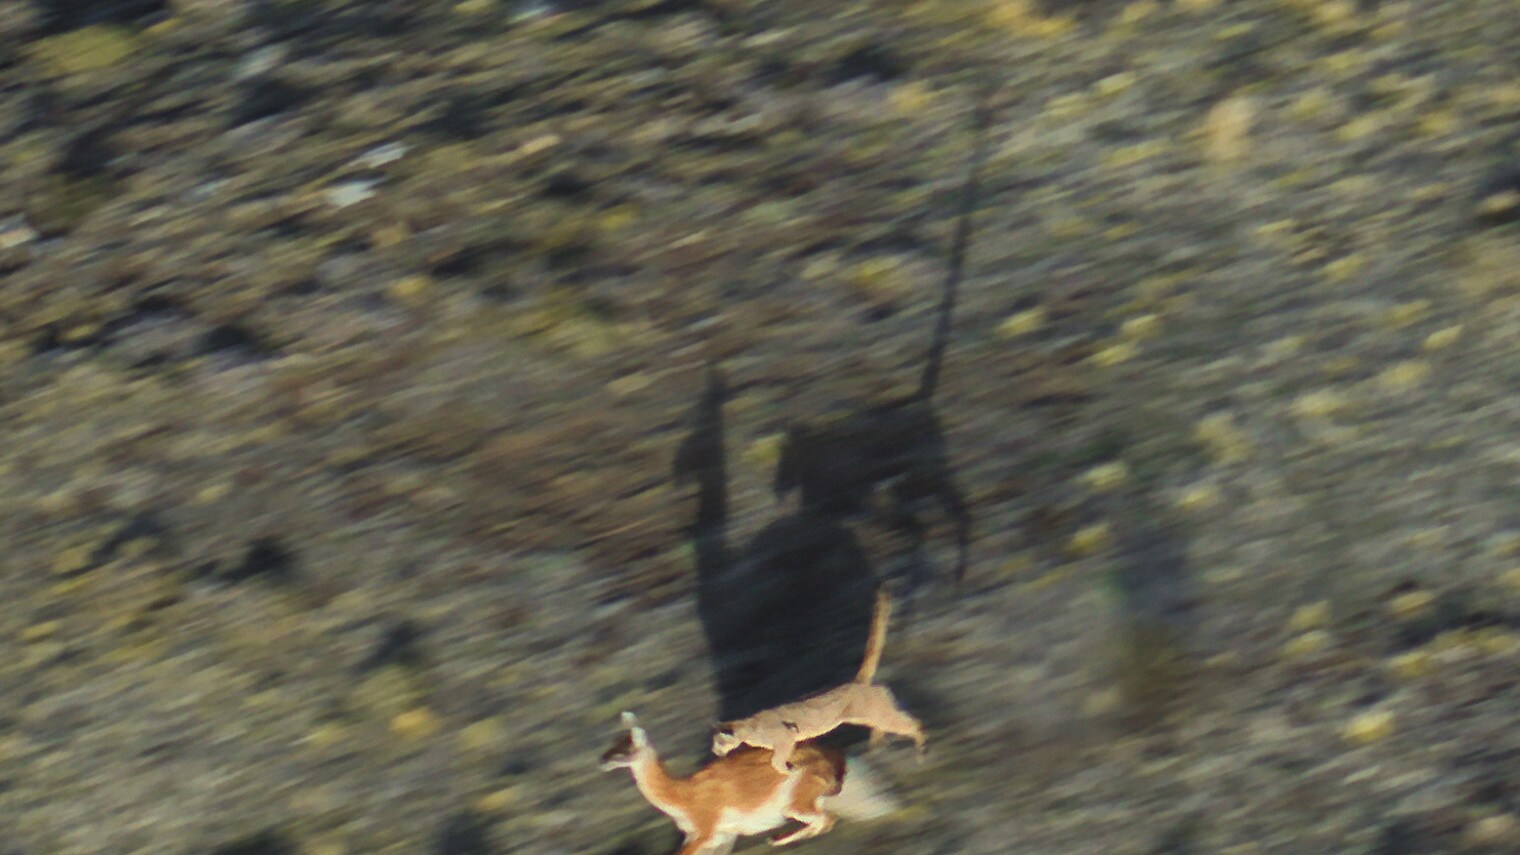 Aerial of puma attaching a guanaco. (National Geographic for Disney+/Bertie Gregory)